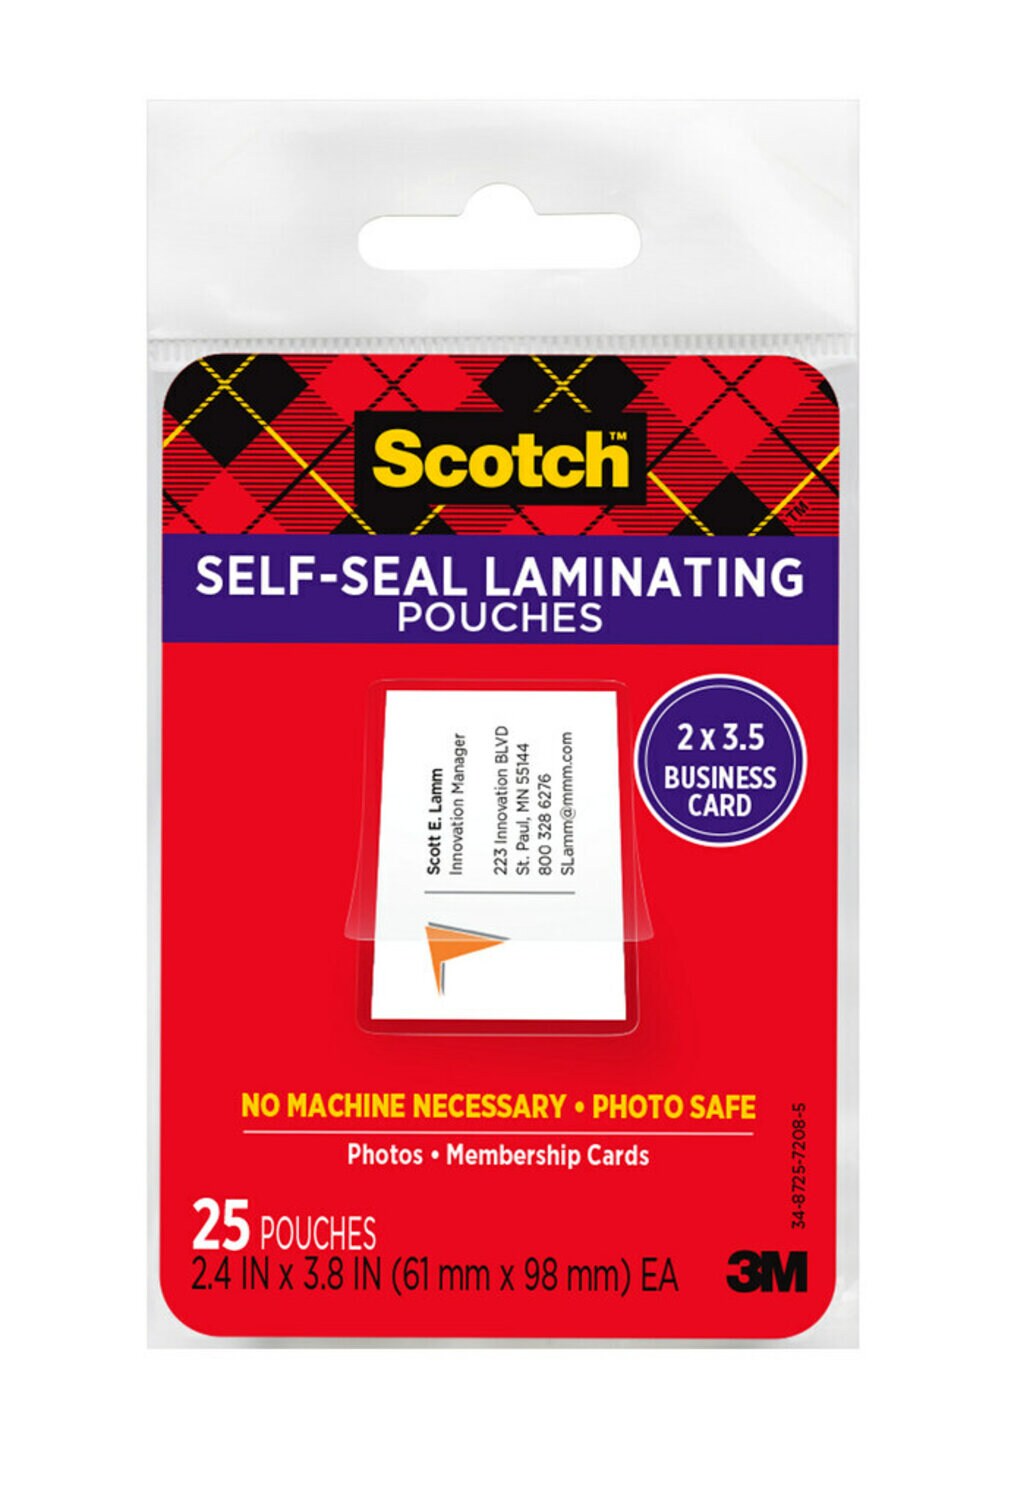 7000122971 - Scotch Self-Sealing Laminating Pouches LS851G Business Card size